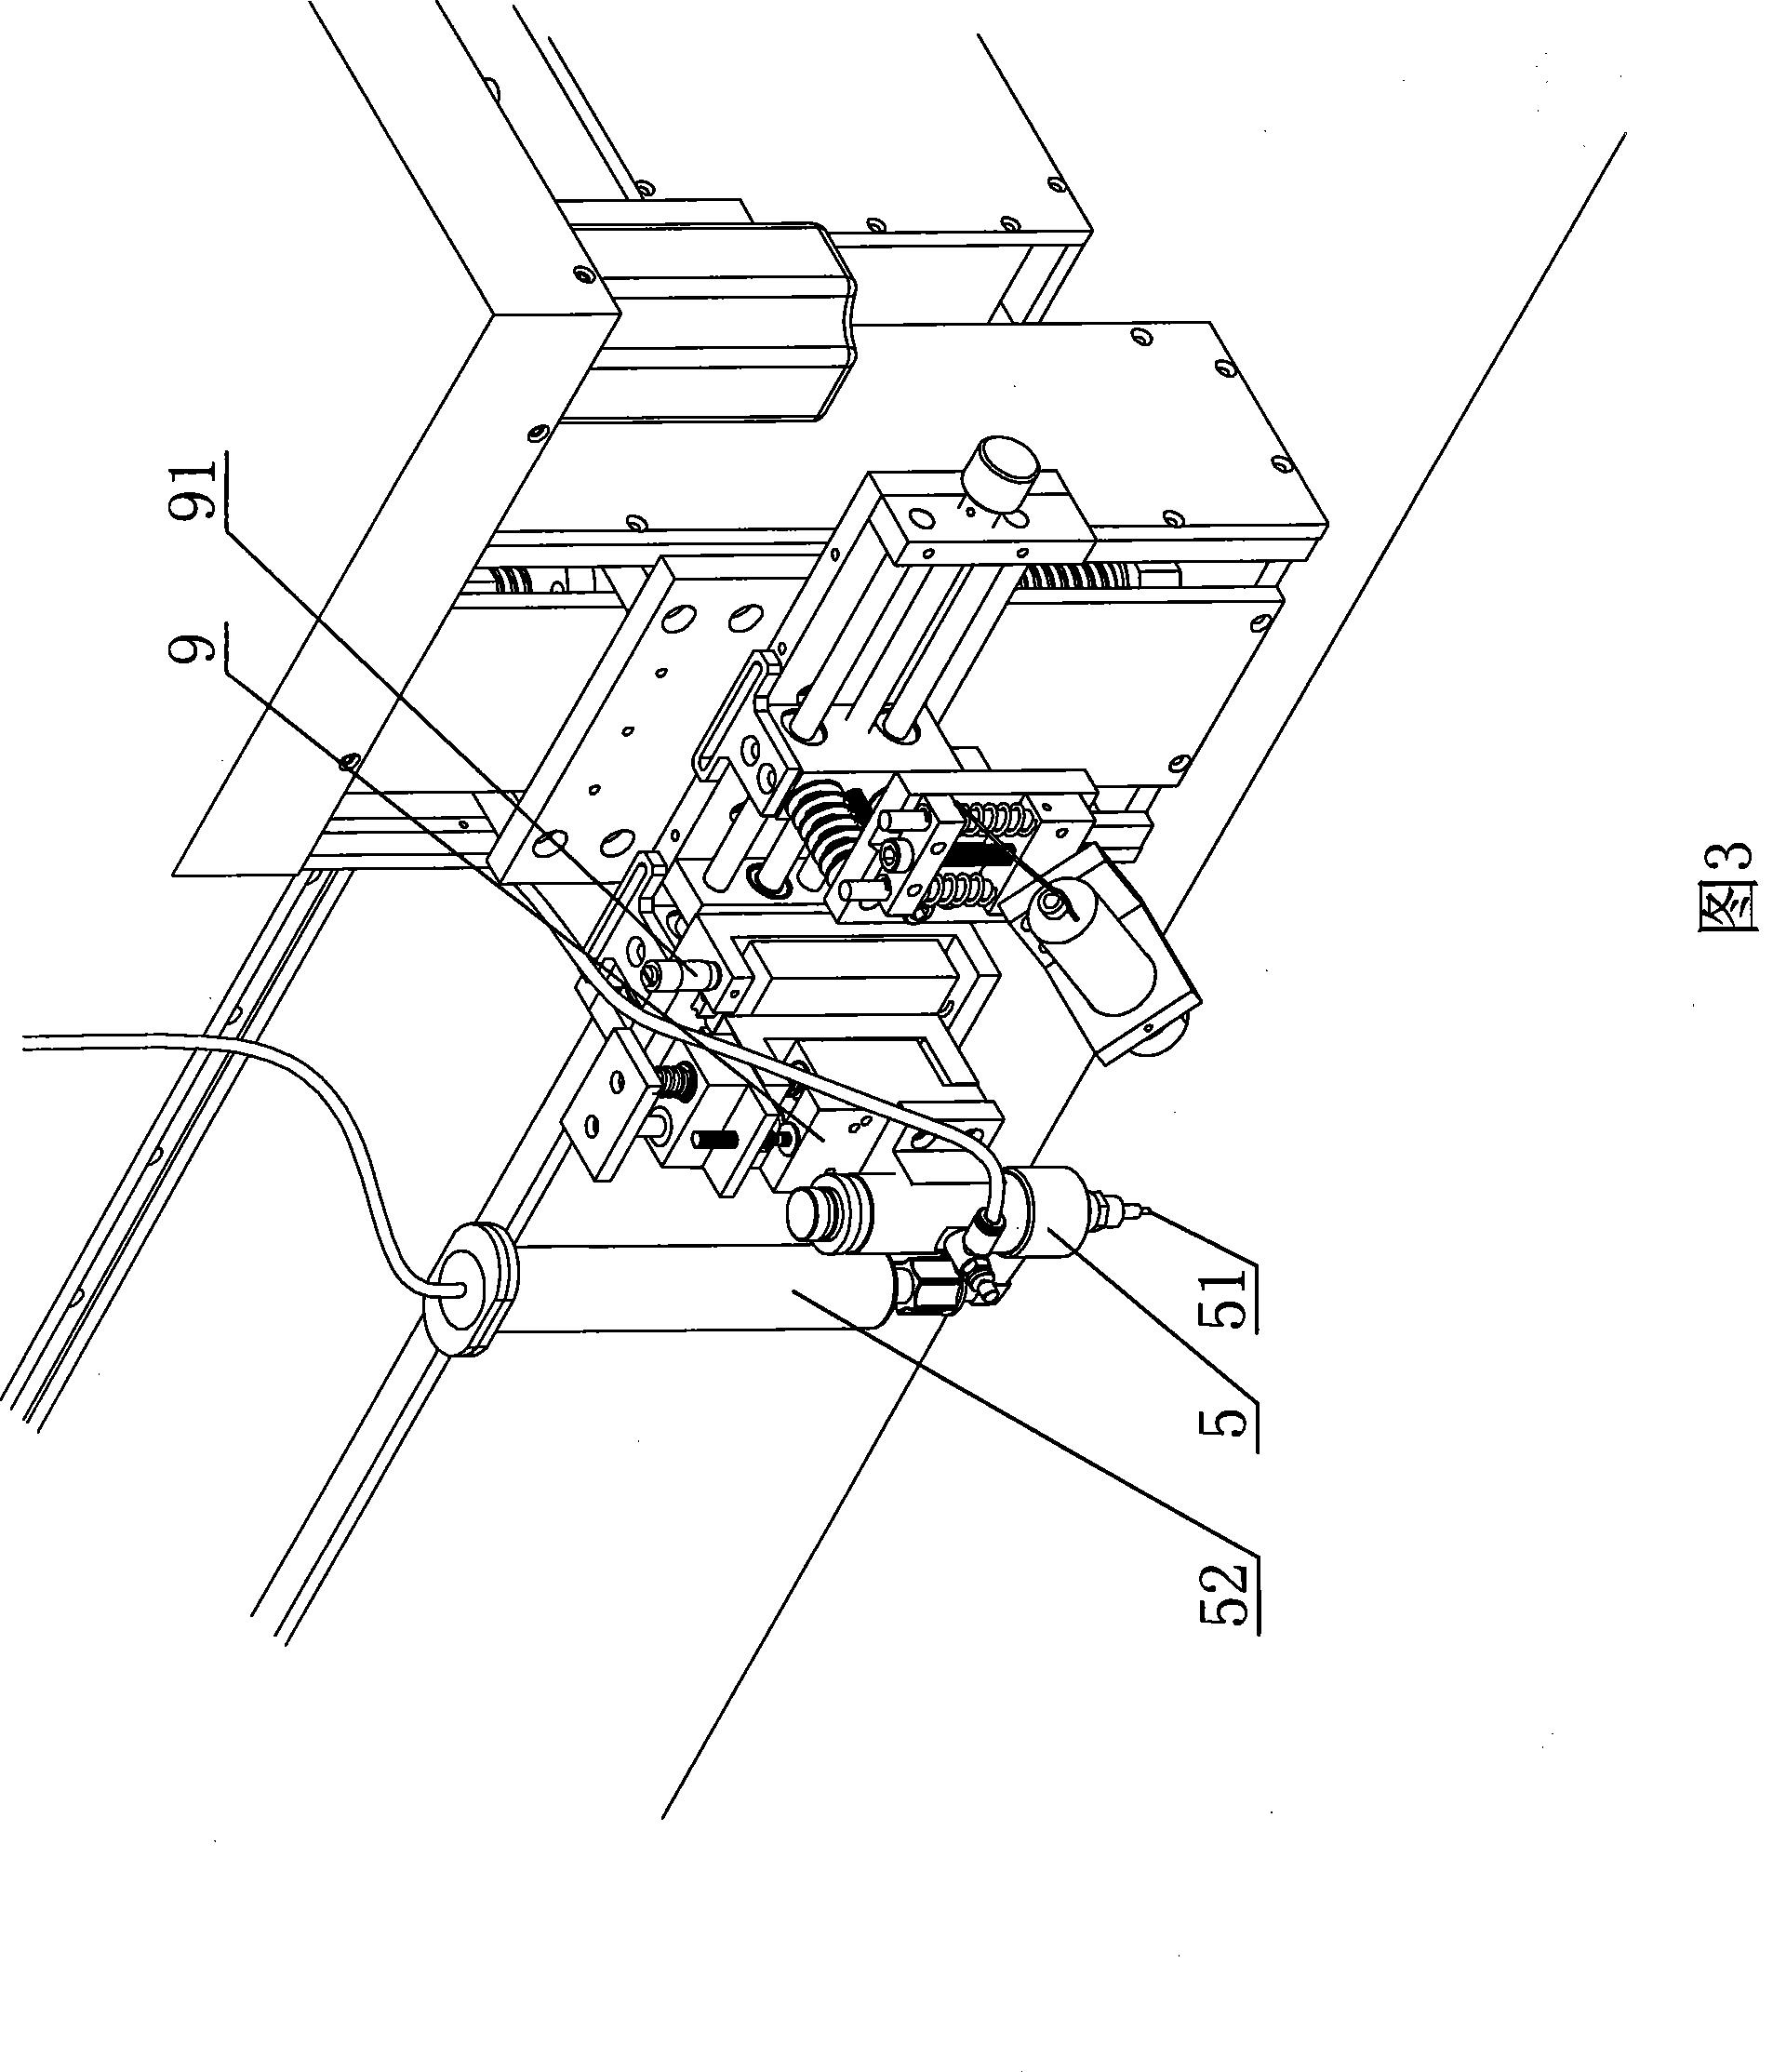 LCD cade-port gum dispersing device and method